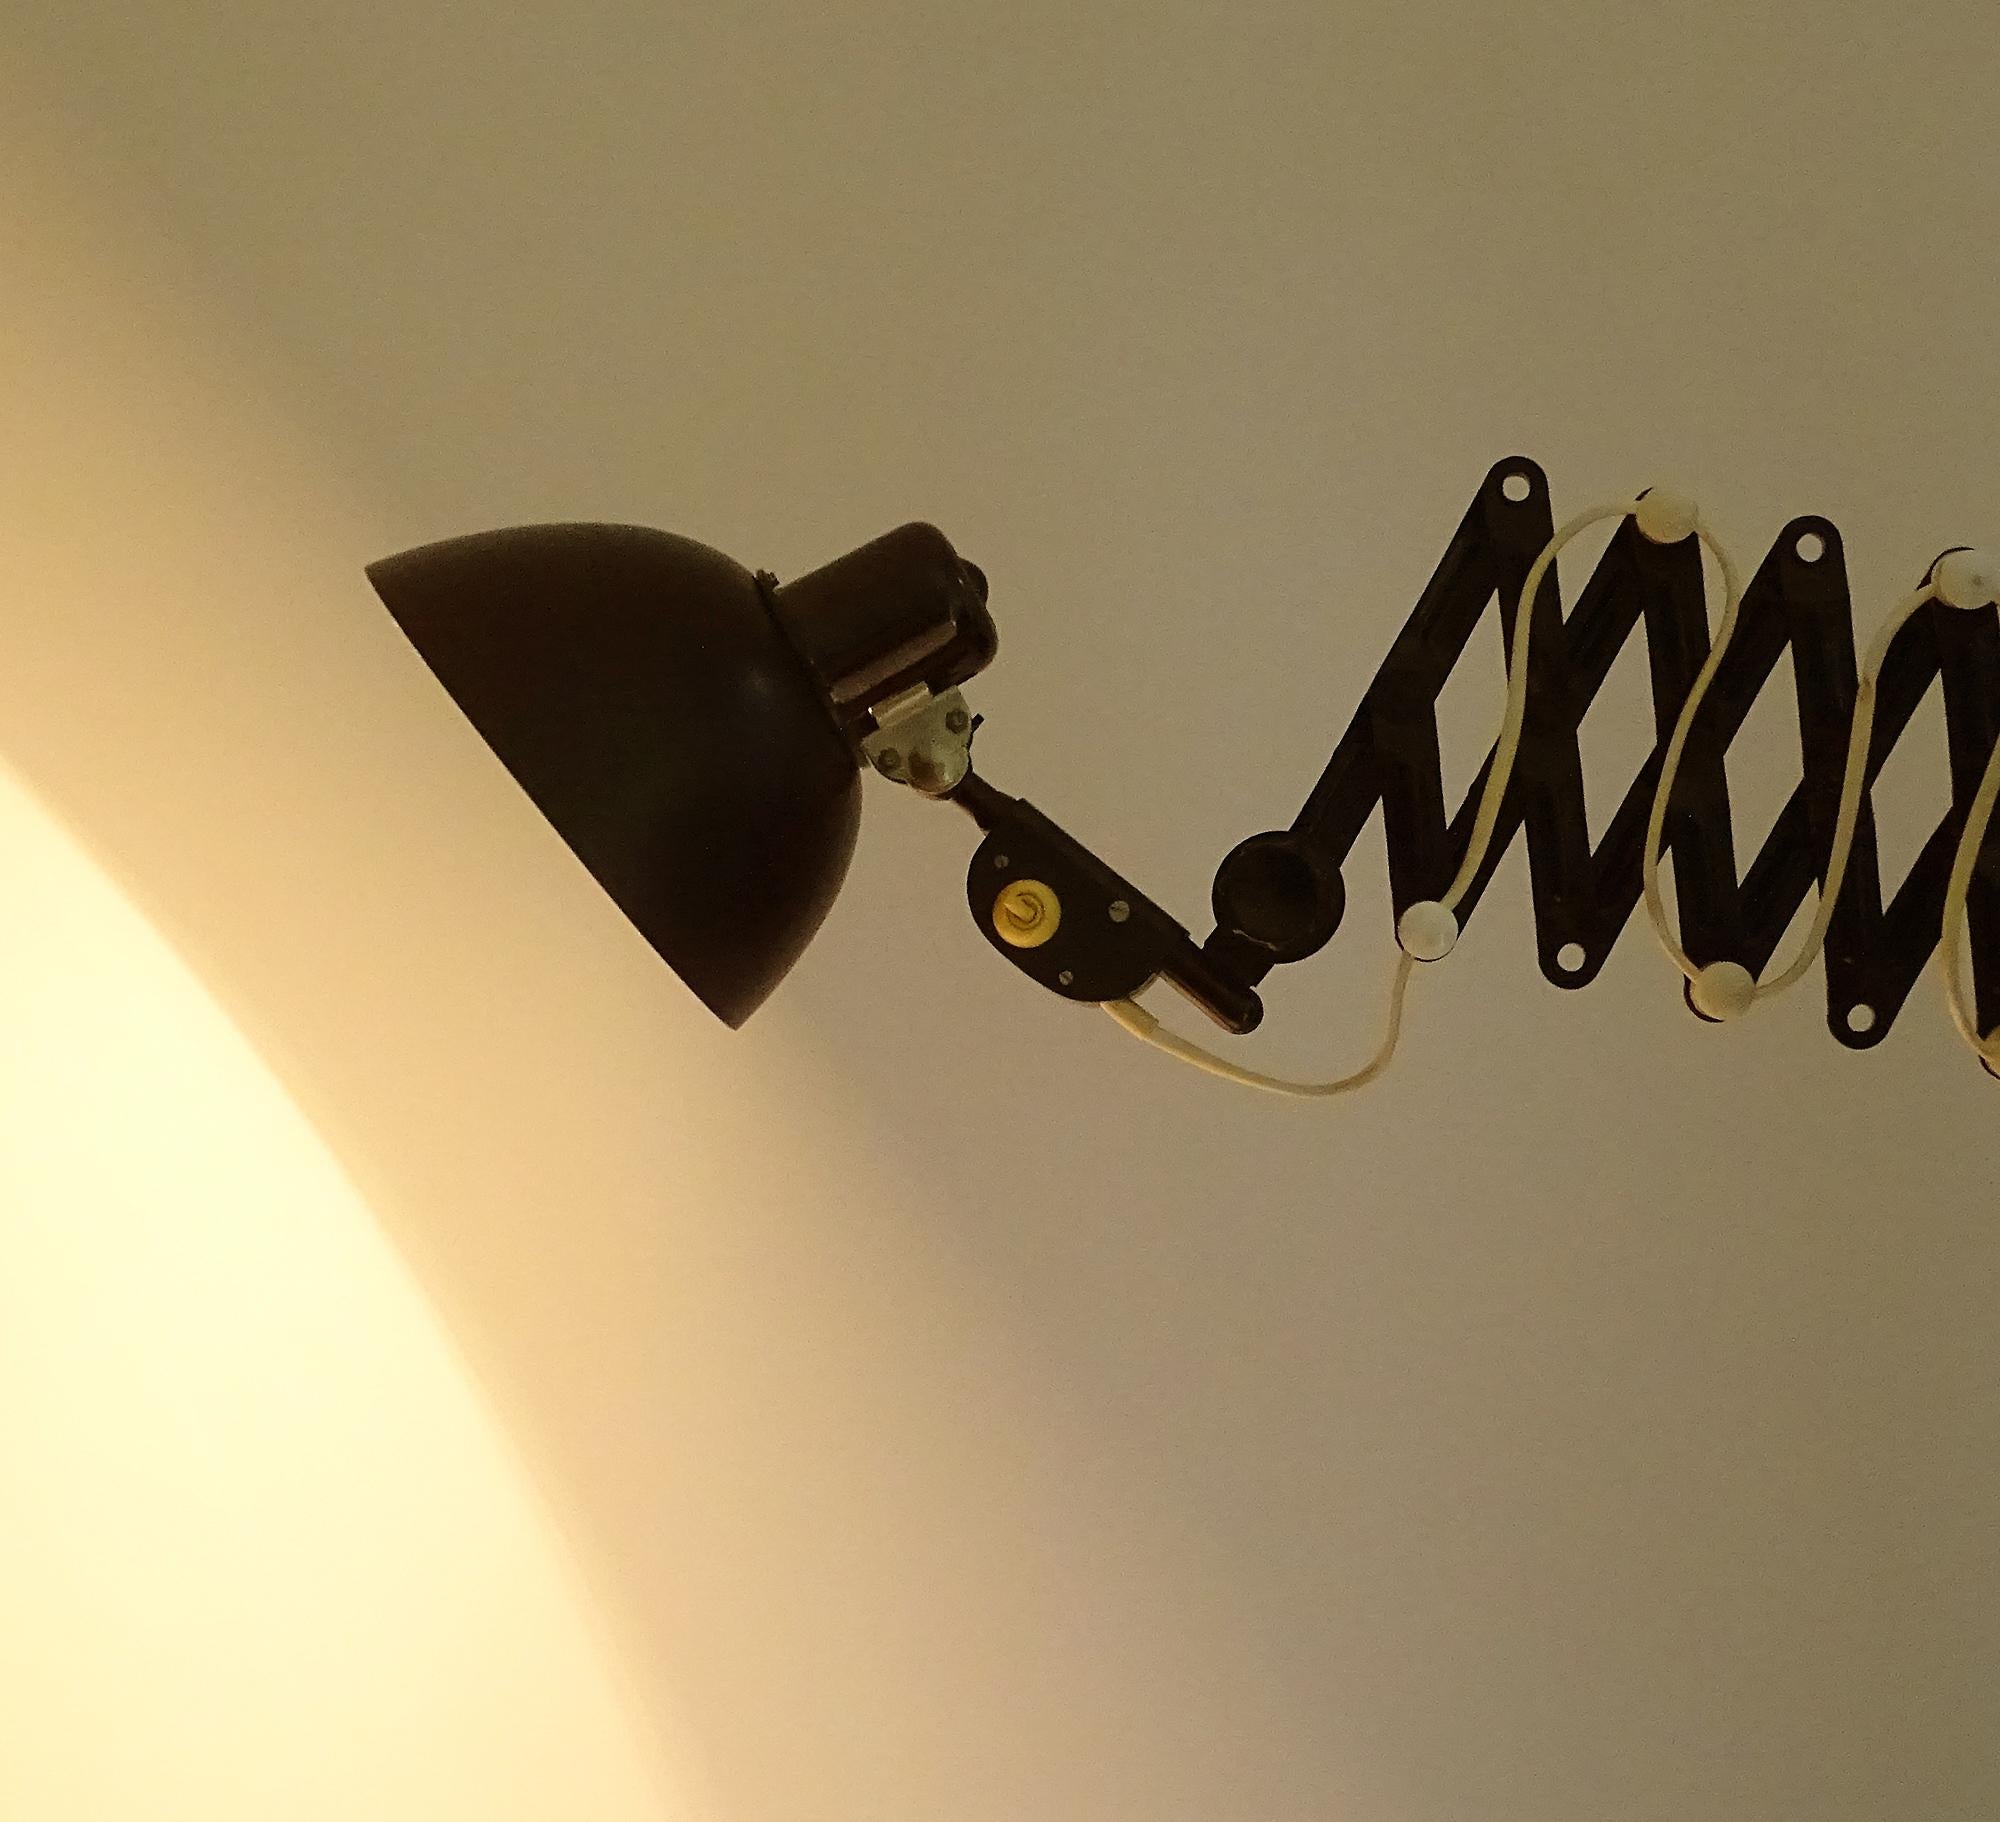 Art Deco metal and bakelite wall scissor lamp in black and white trim. Based on a design by Christian Dell. 
Wiring: The lamps have been tested with US American light bulbs under 120v and they work flawlessly.  
Dimensions (max extension):
H 8.26